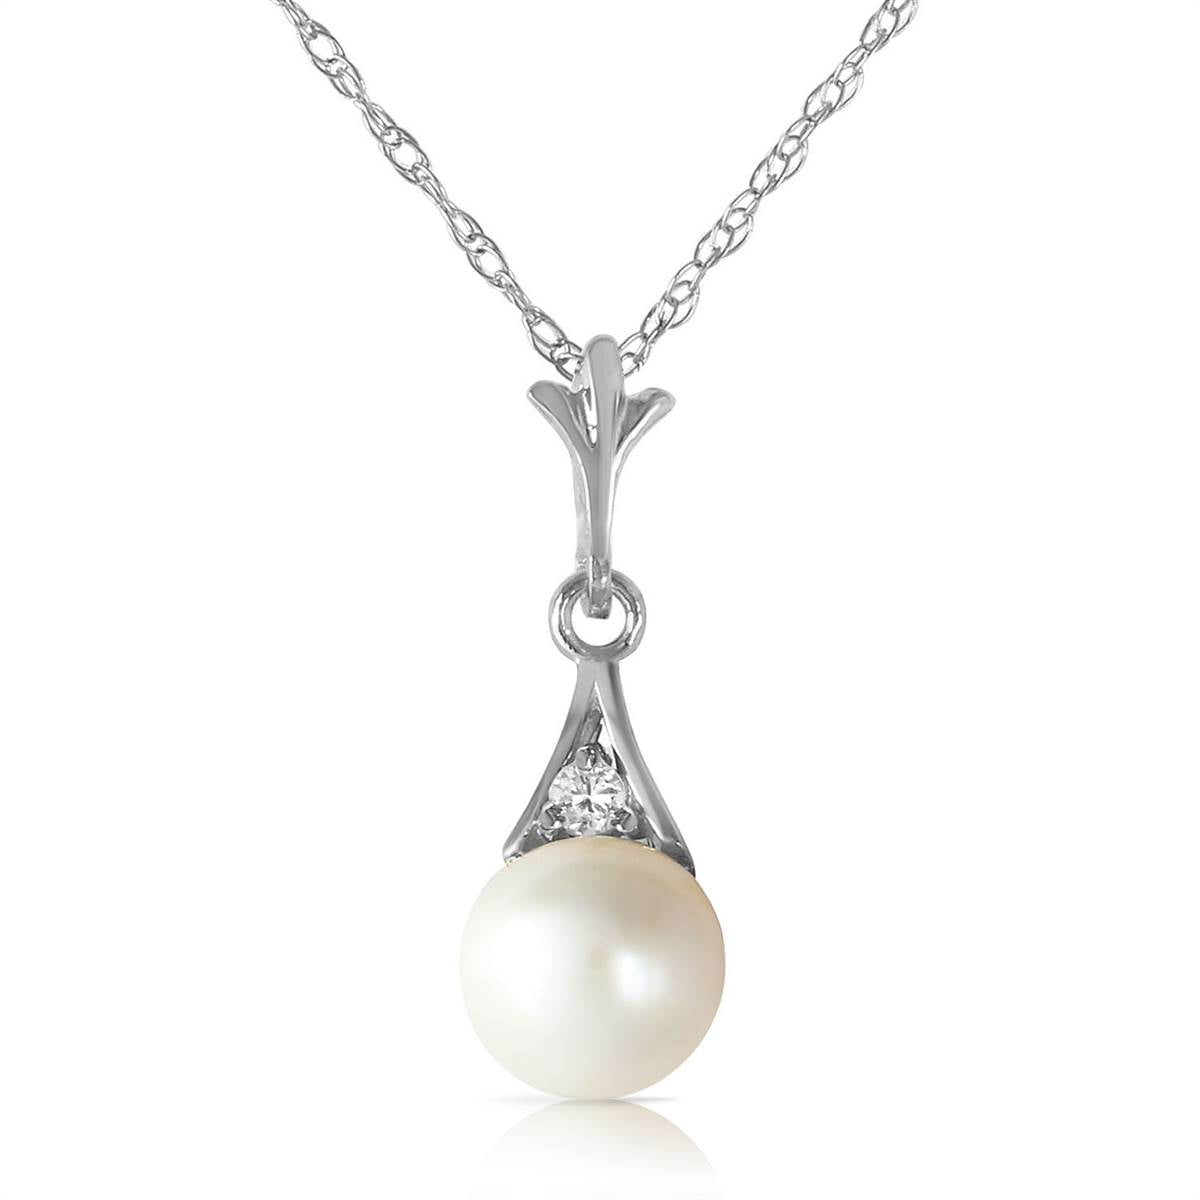 2.03 Carat 14K Solid White Gold Necklace Diamond Pearl